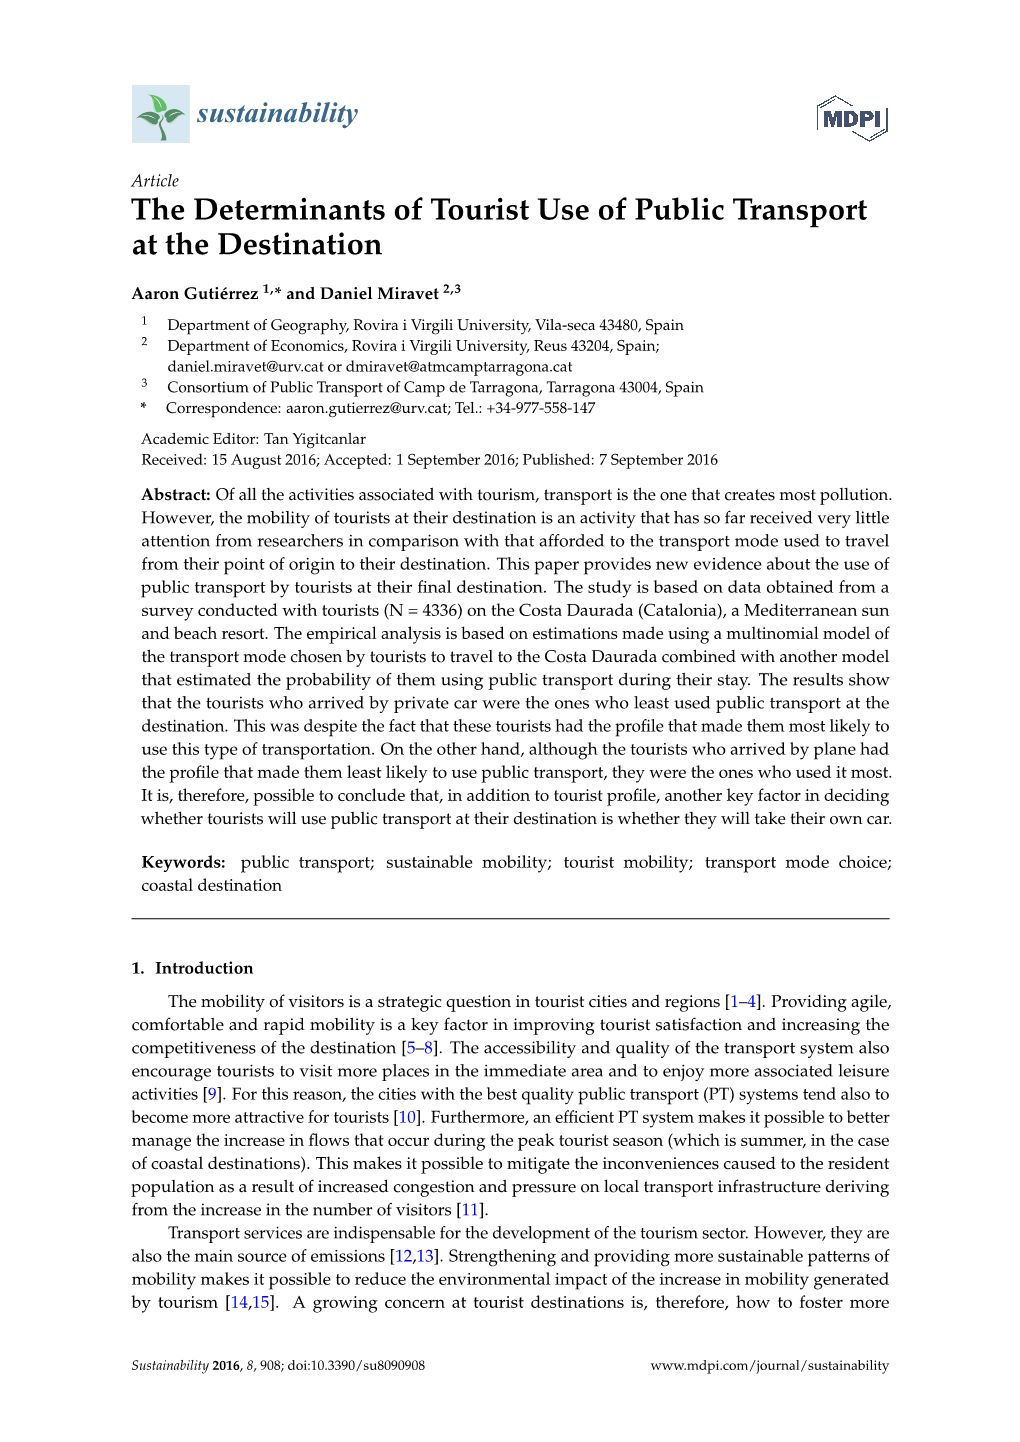 The Determinants of Tourist Use of Public Transport at the Destination